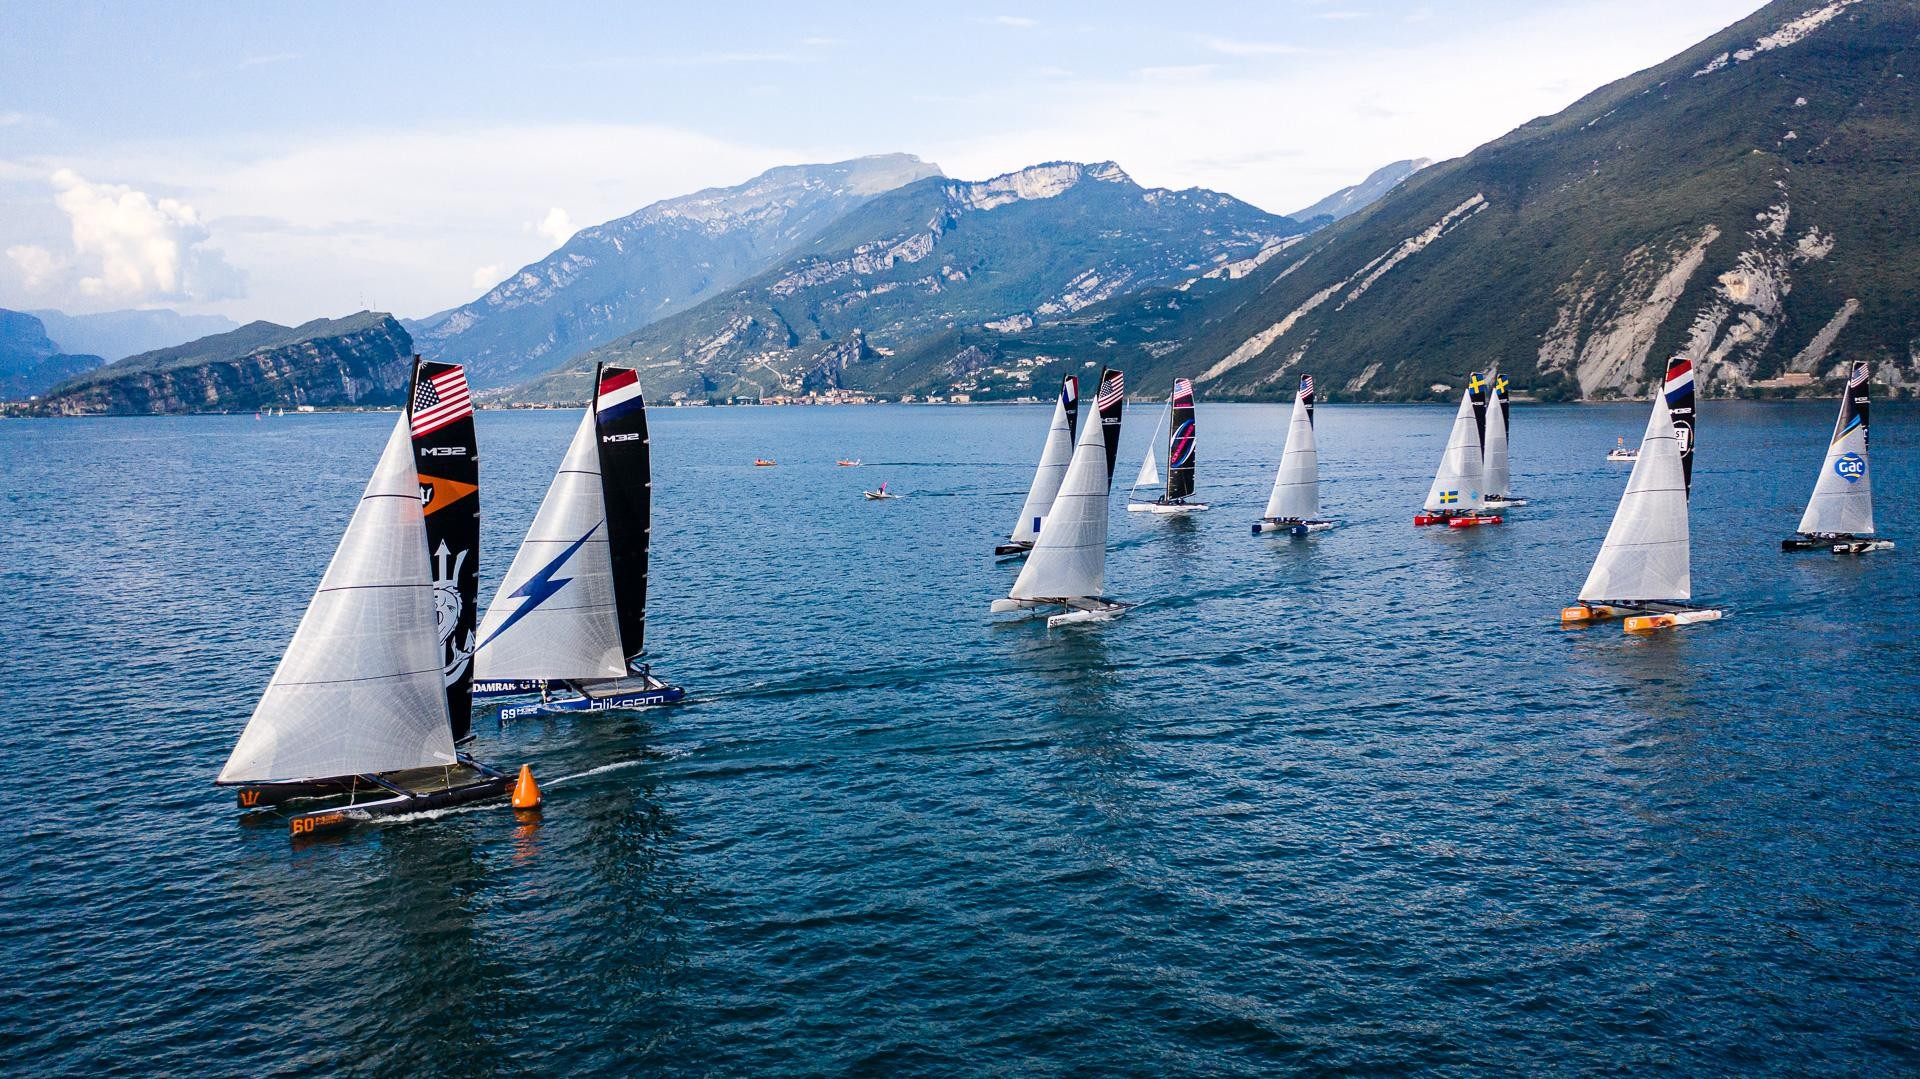 Small lead to Convexity after awkward M32 Pre-Worlds opening day